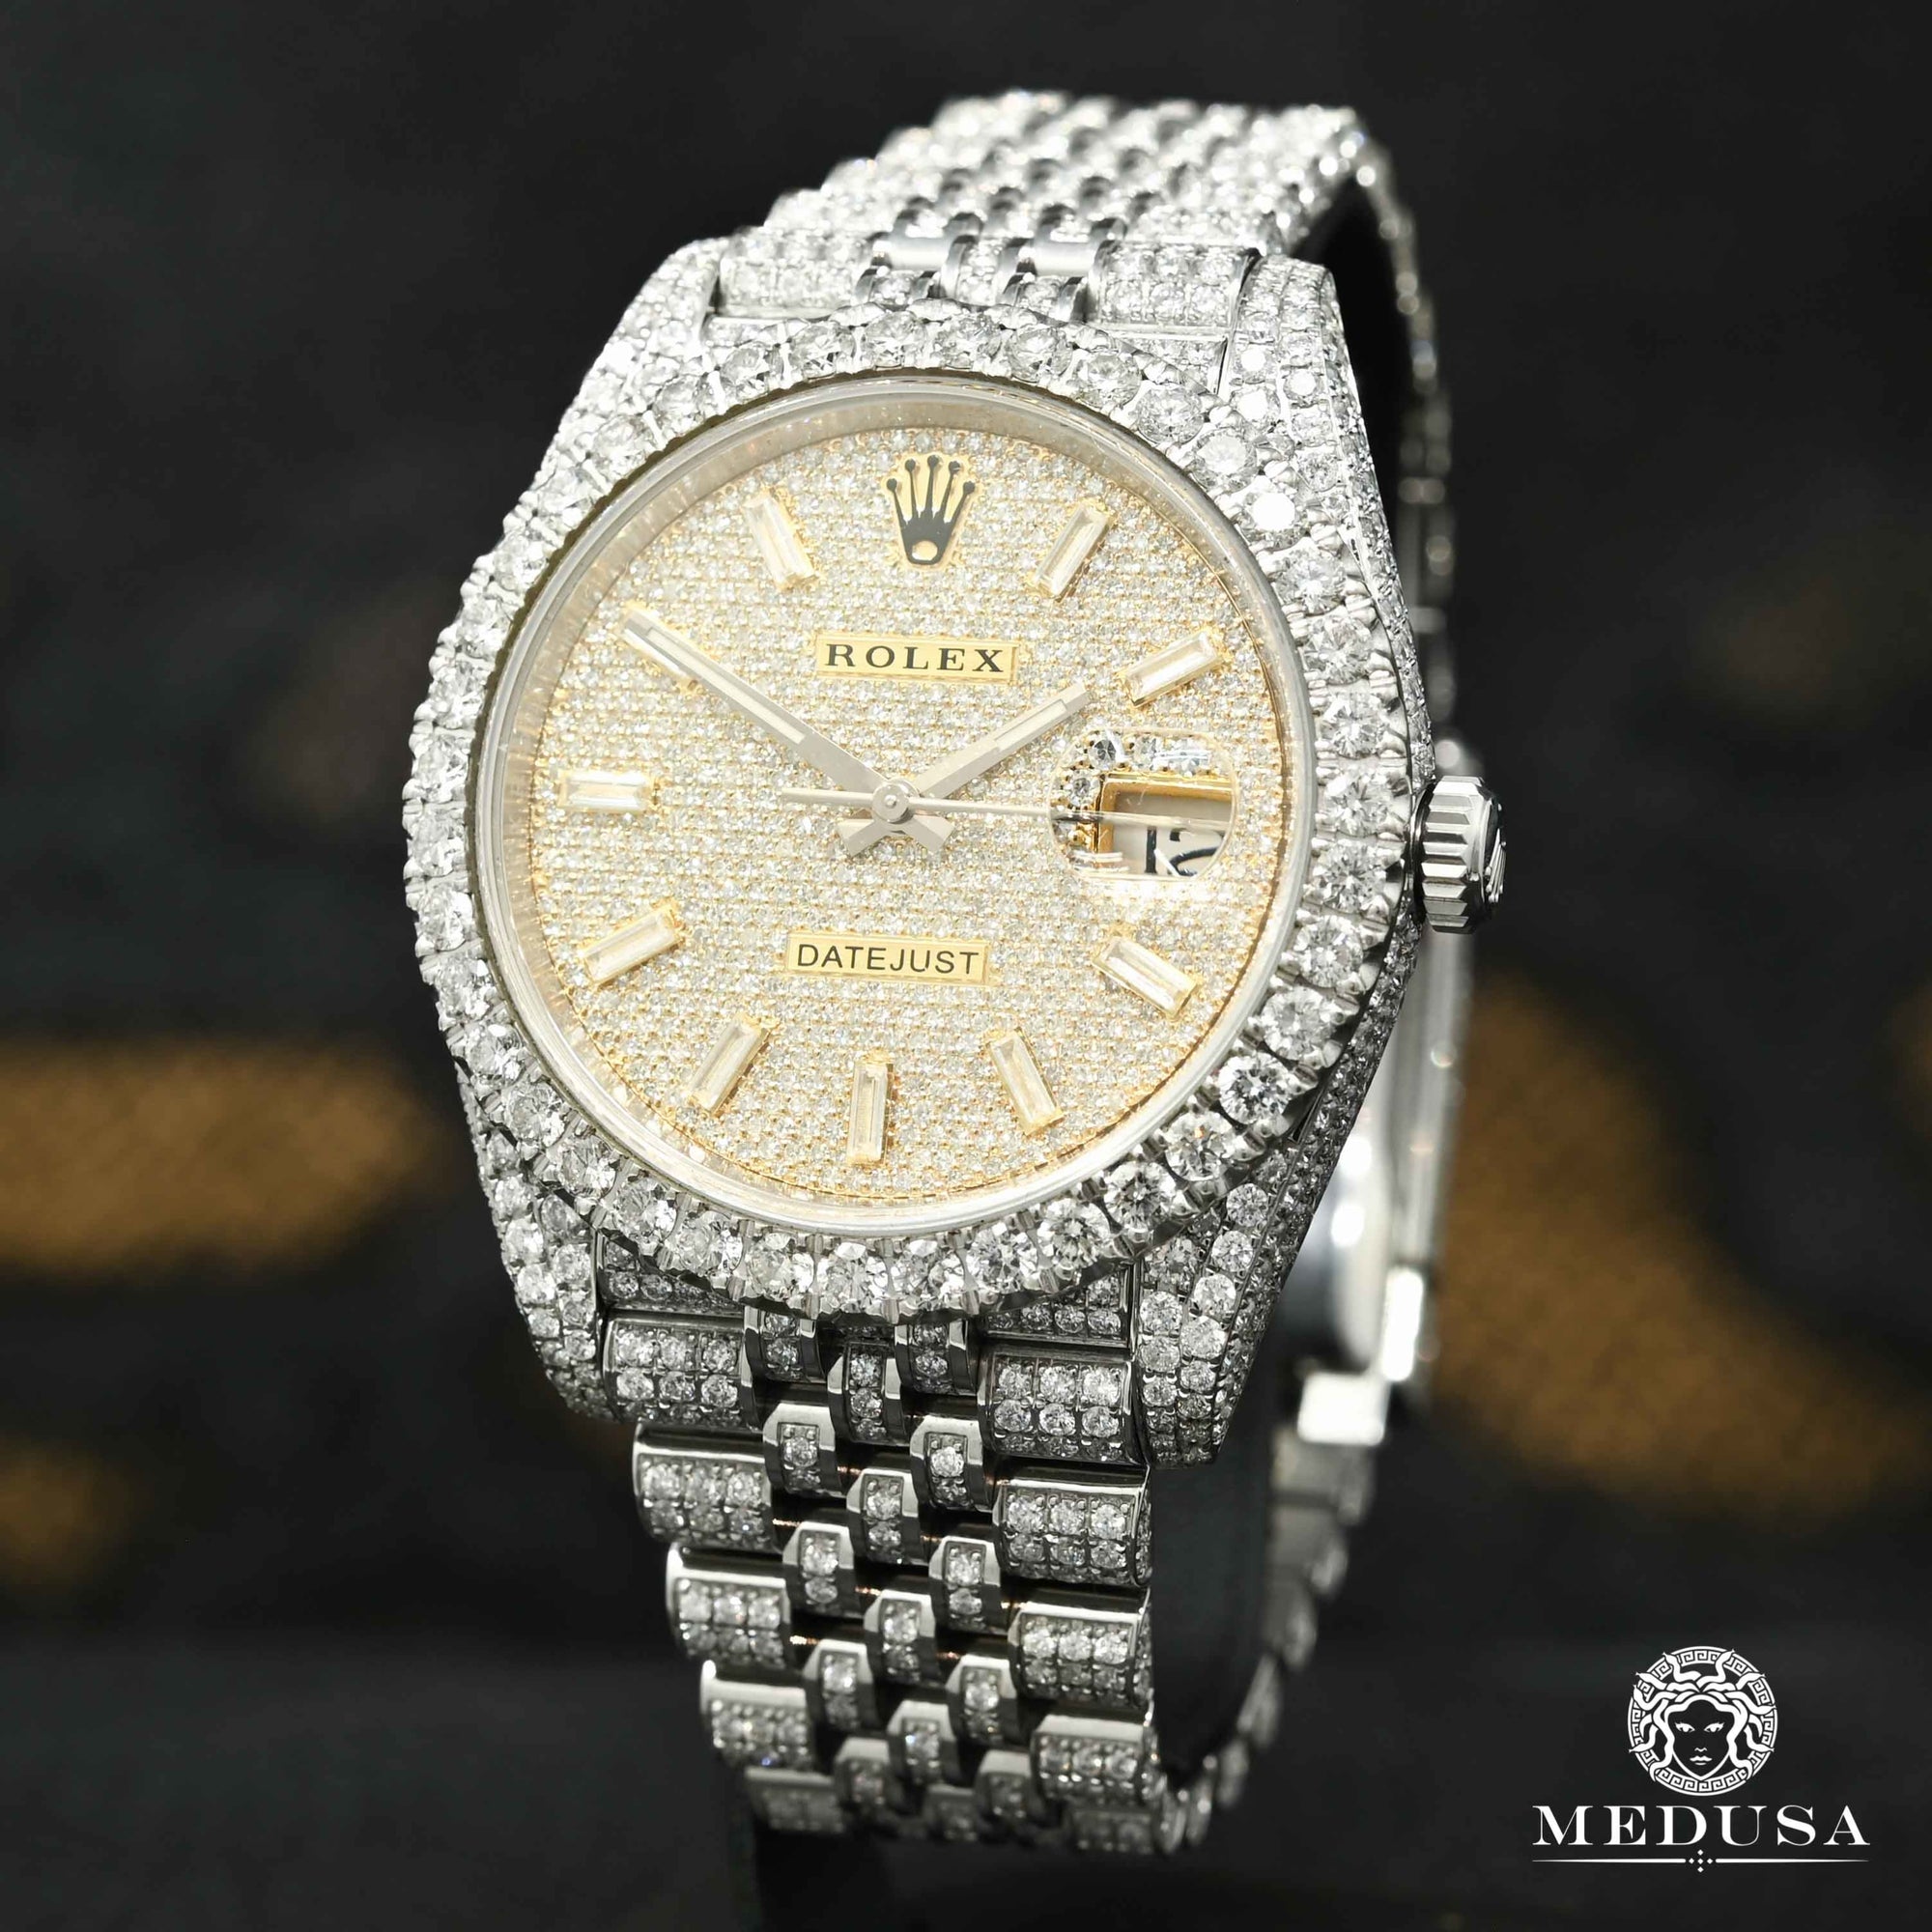 Rolex watch | Rolex Datejust Men's Watch 41mm - Jubilee Full Honeycomb Baguette Inverted Stainless